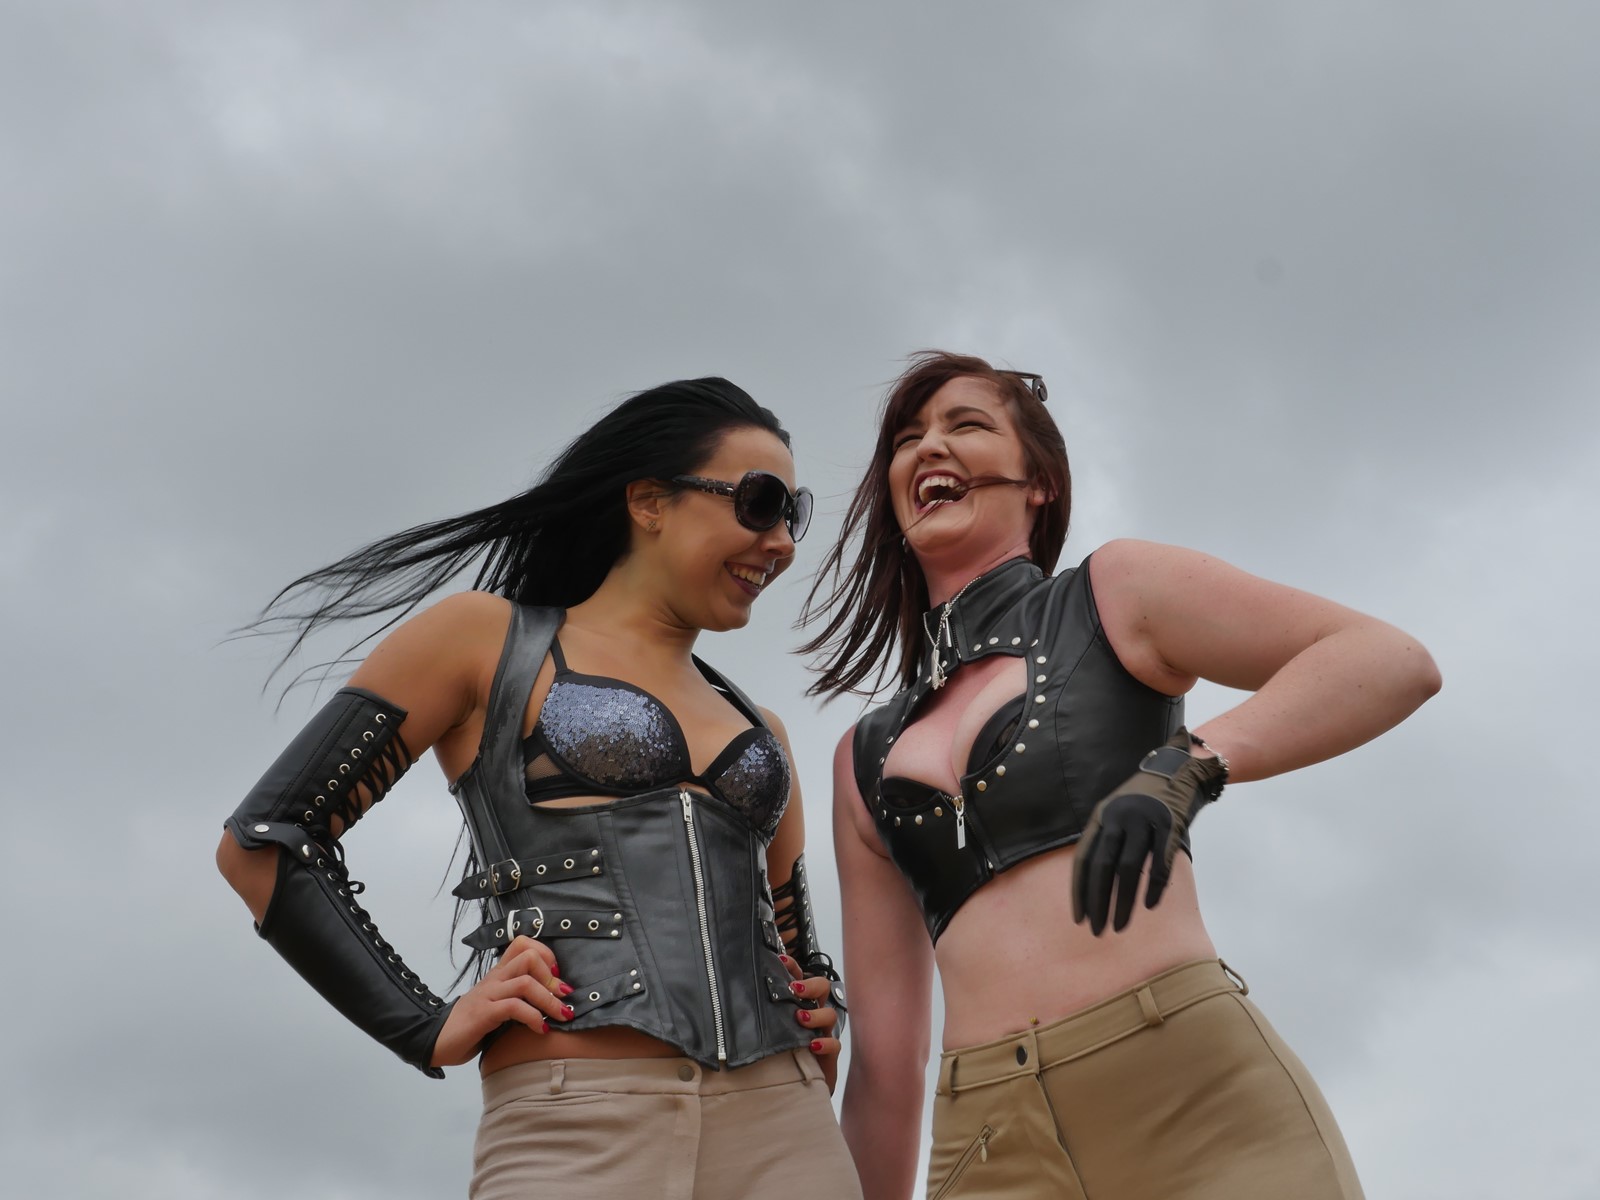 Laughing Mistress Gaia FemDomme Rome Italy Goddess Padrona Leather Corset